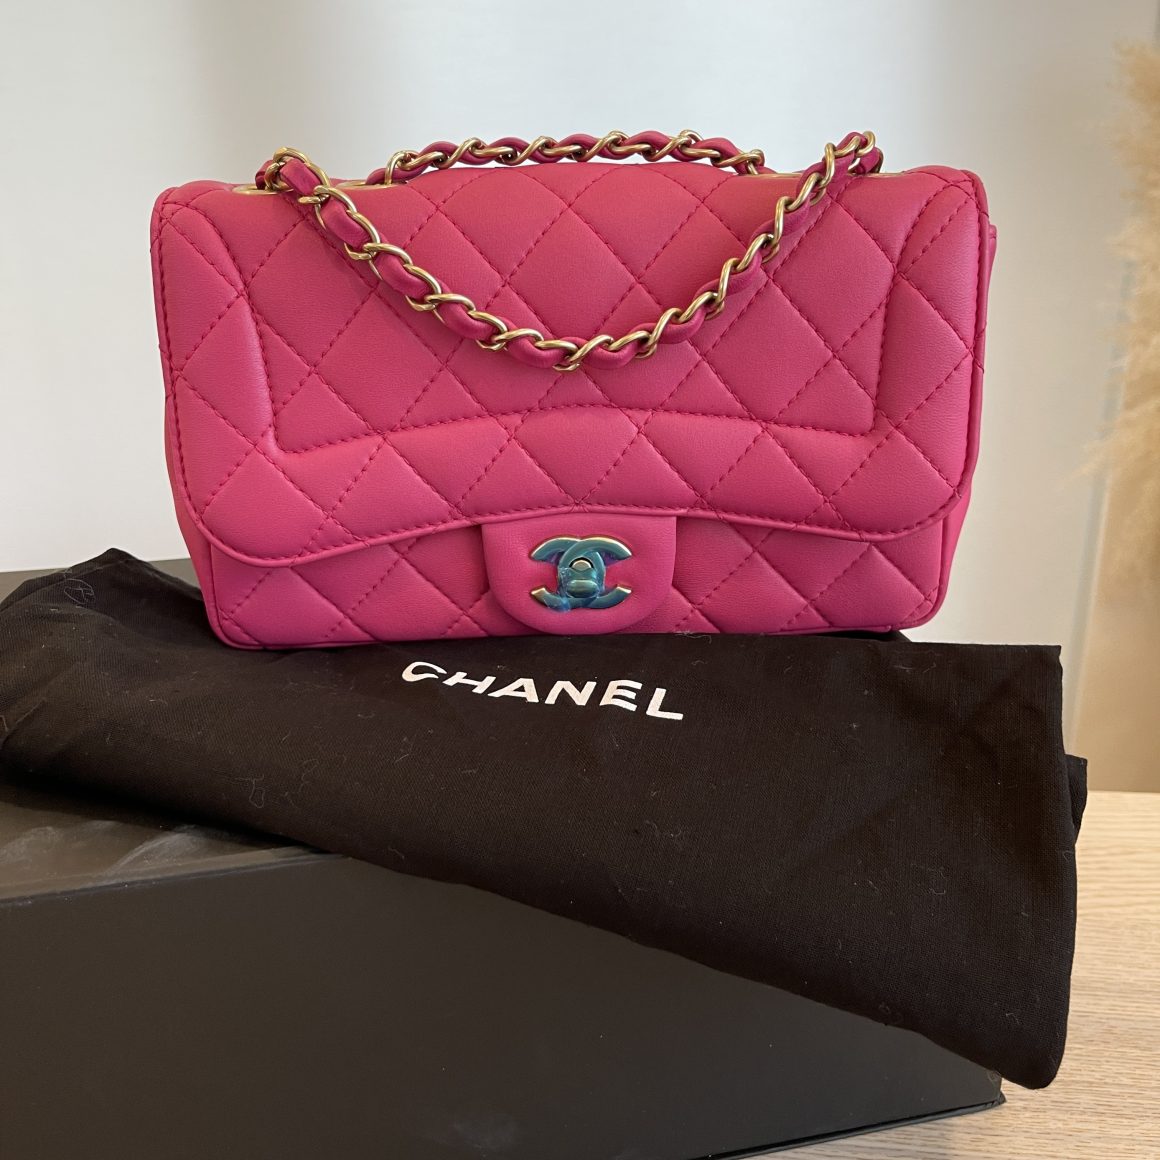 Chanel Lambskin Quilted Mini Mademoiselle Chic Flap Pink Gold Hardware